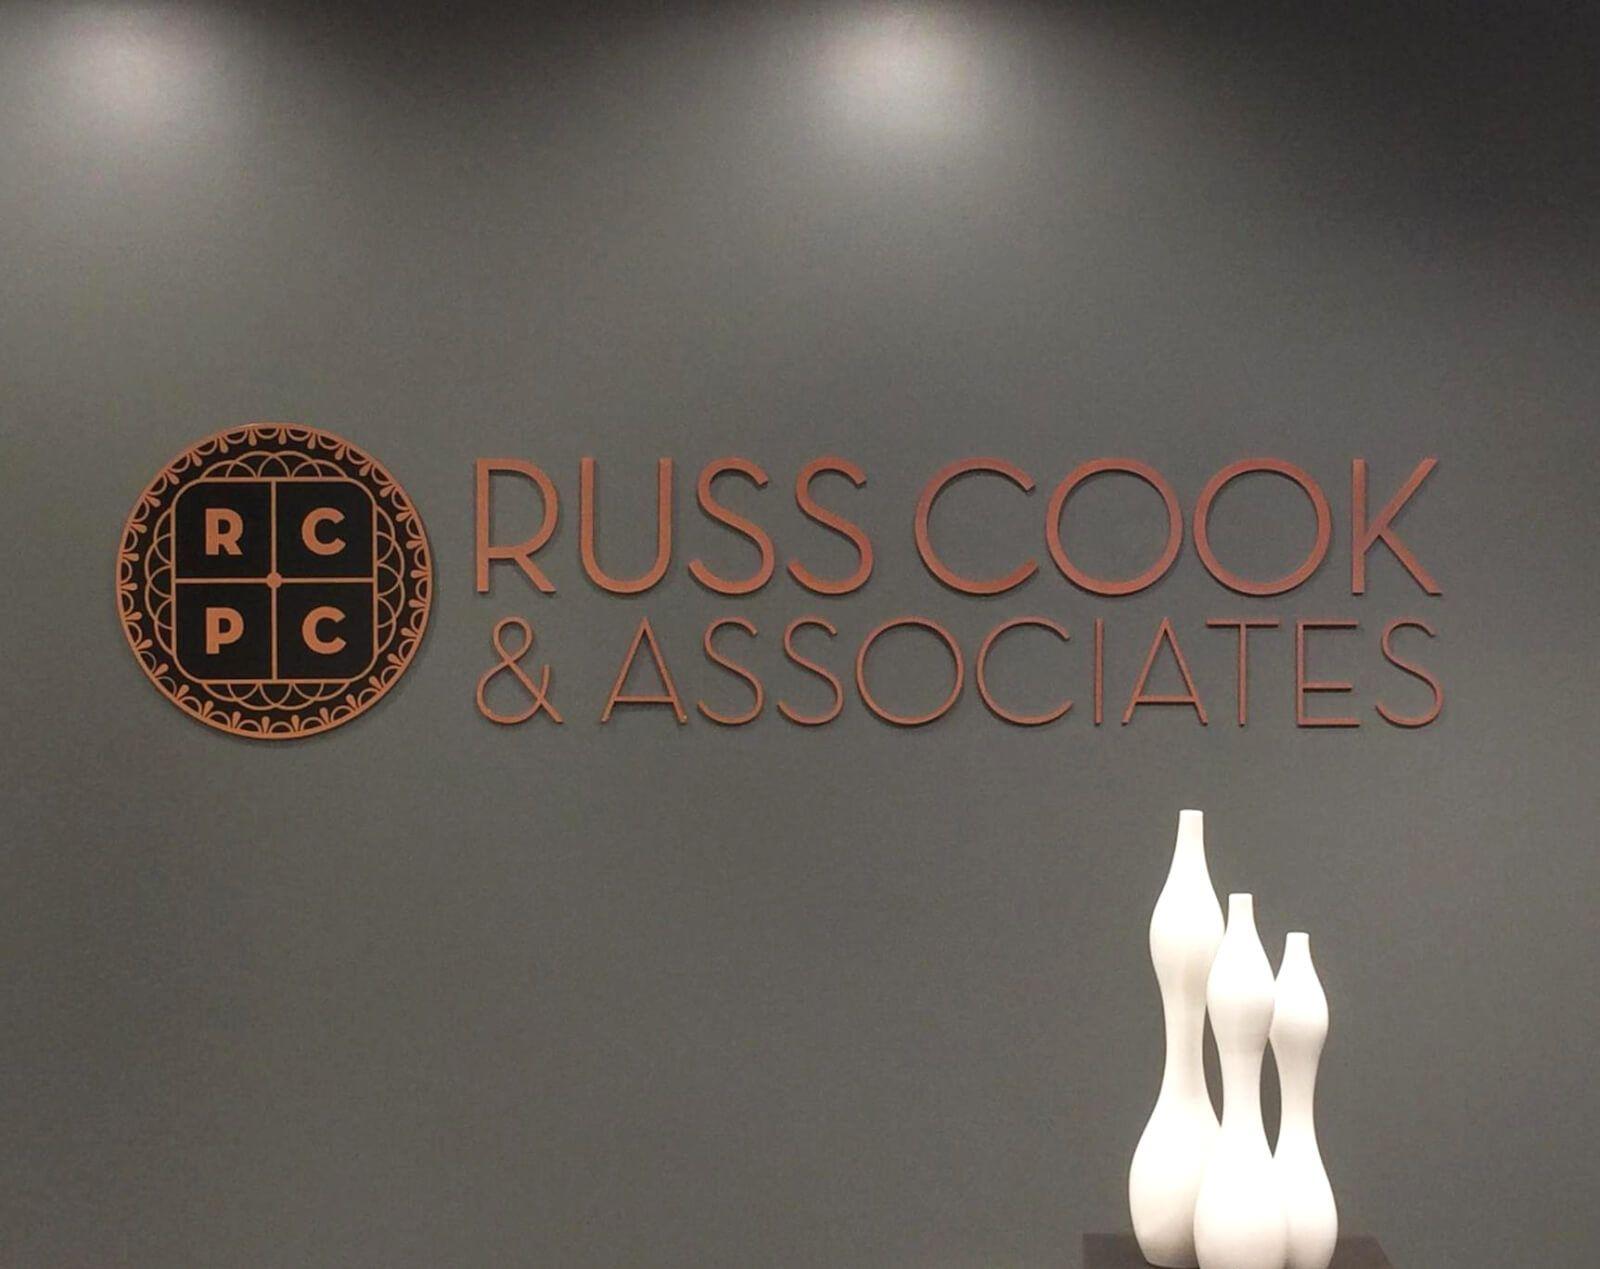 Copper and Gray Logo - Russ Cook and Associates Dimensional Copper Logo Sign – 12-Point ...